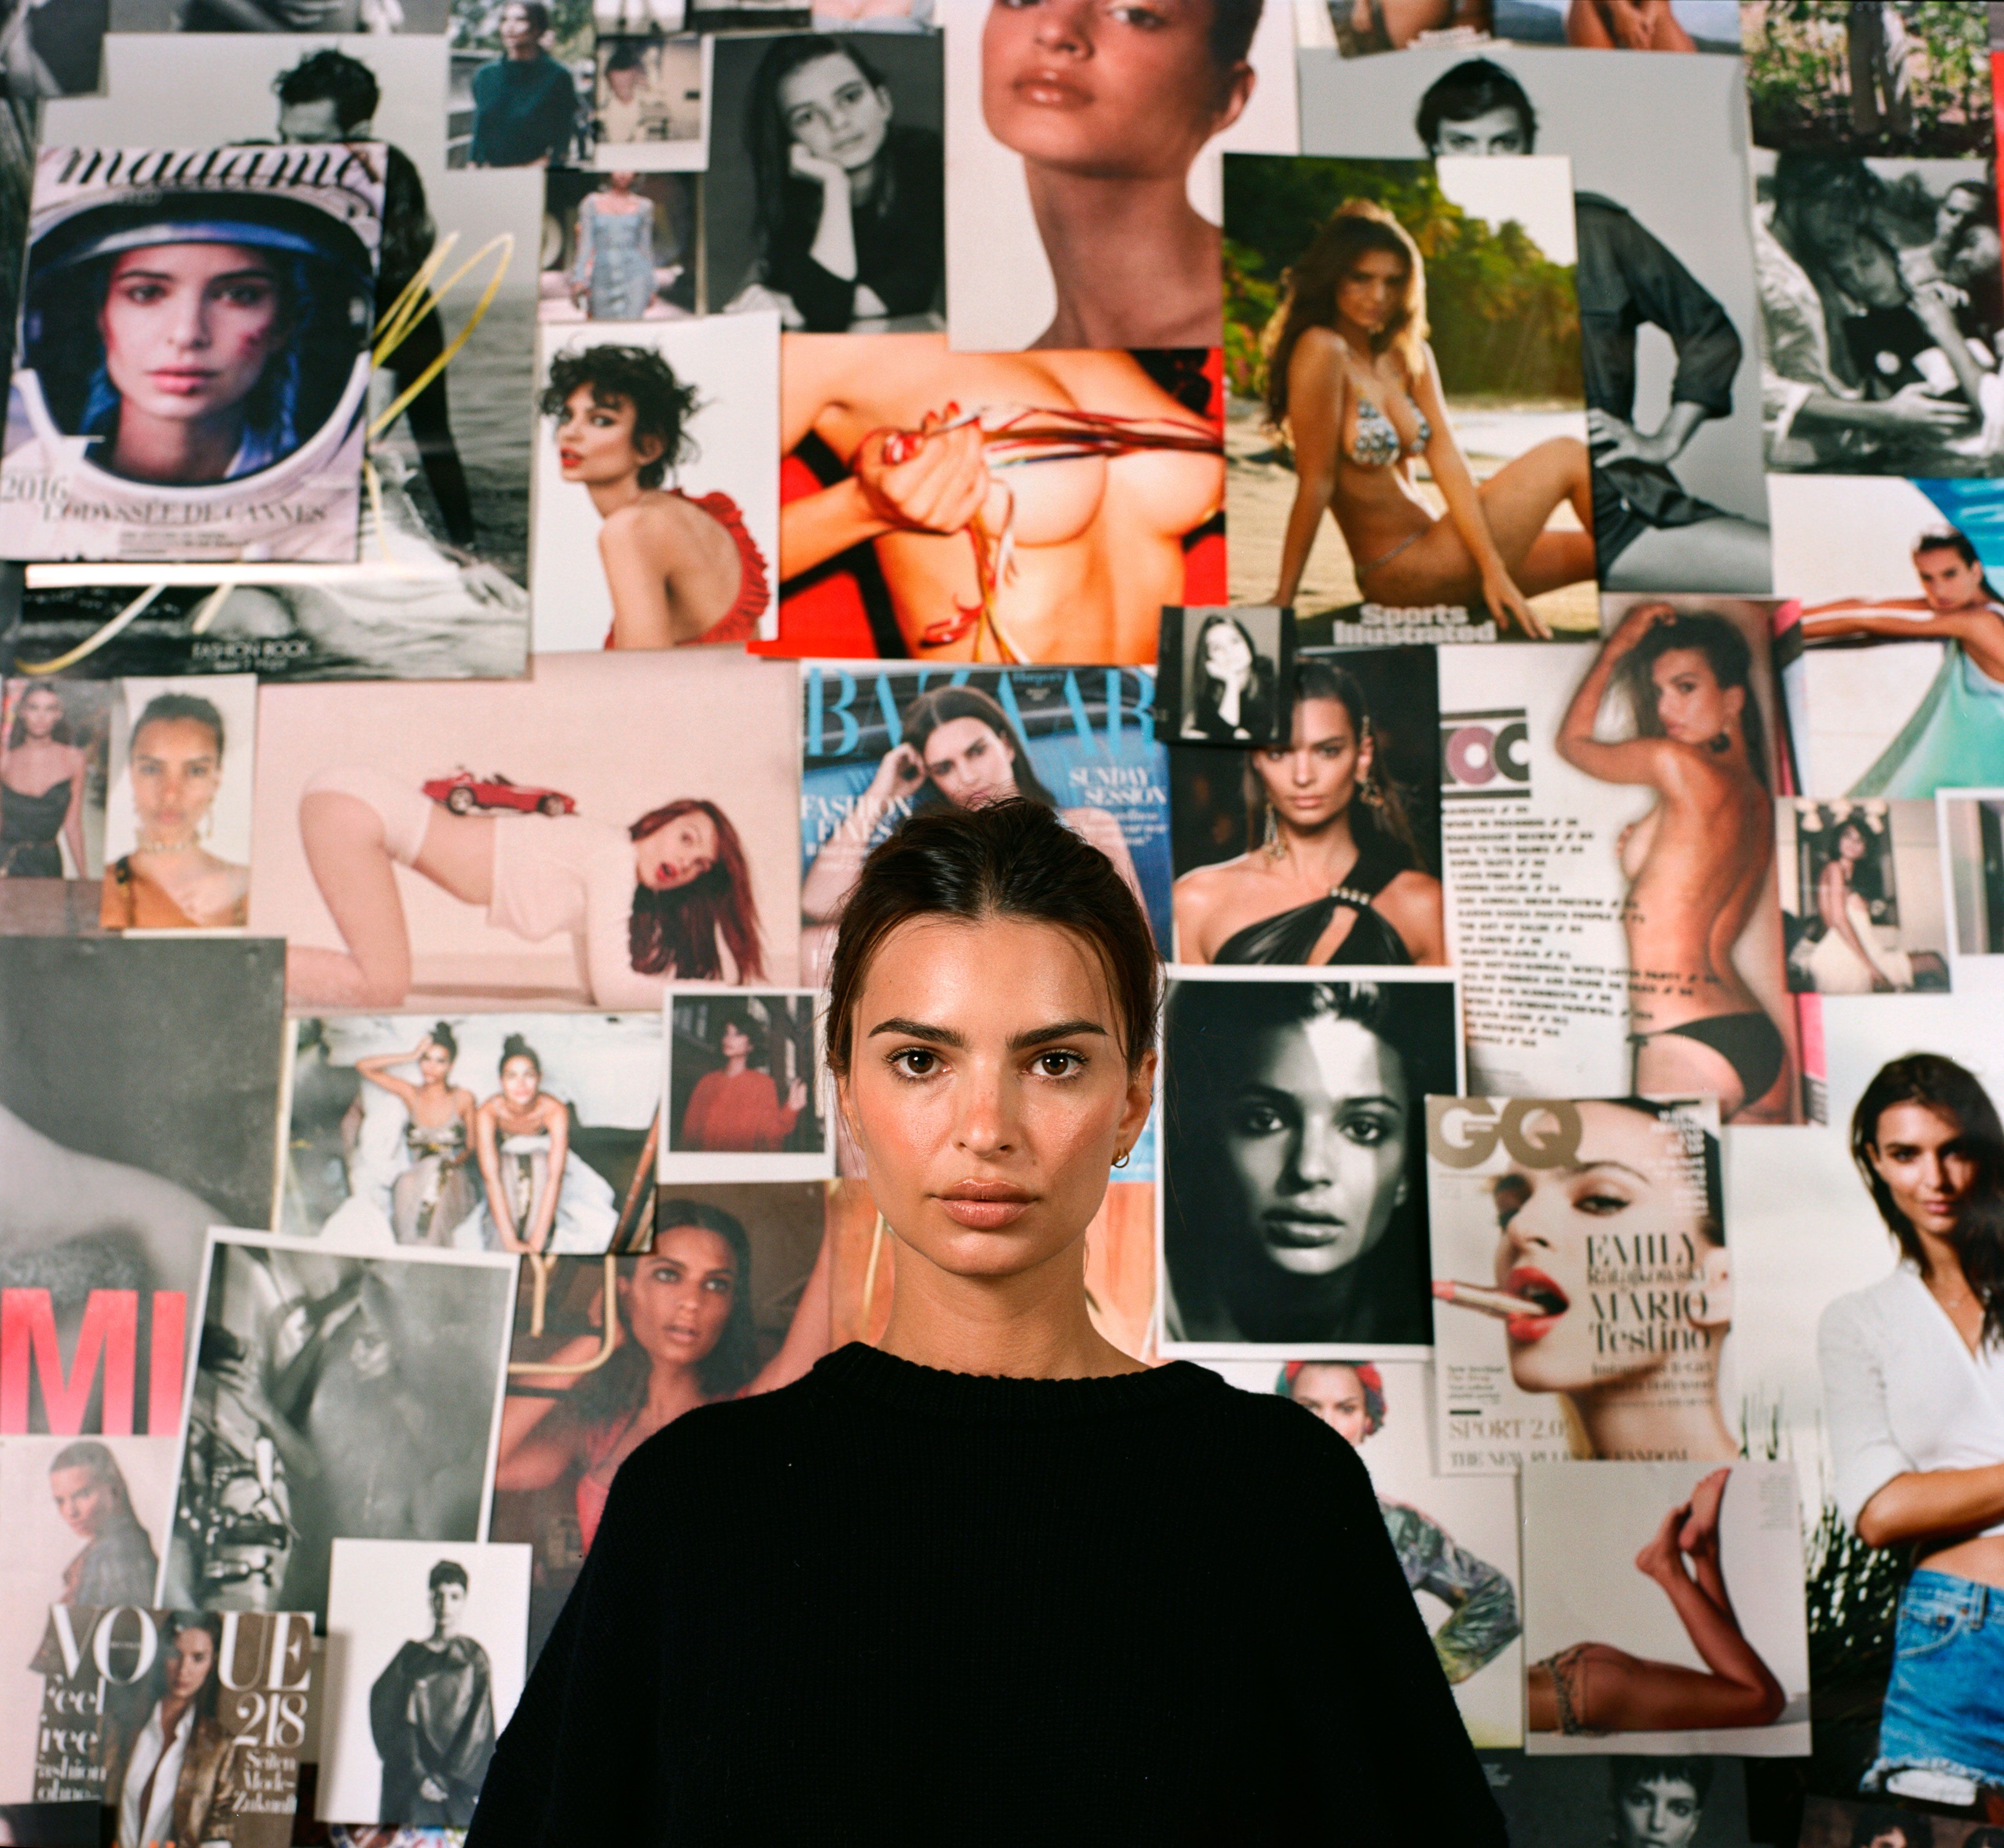 My Body, by Emily Ratajkowski Book Excerpt image picture